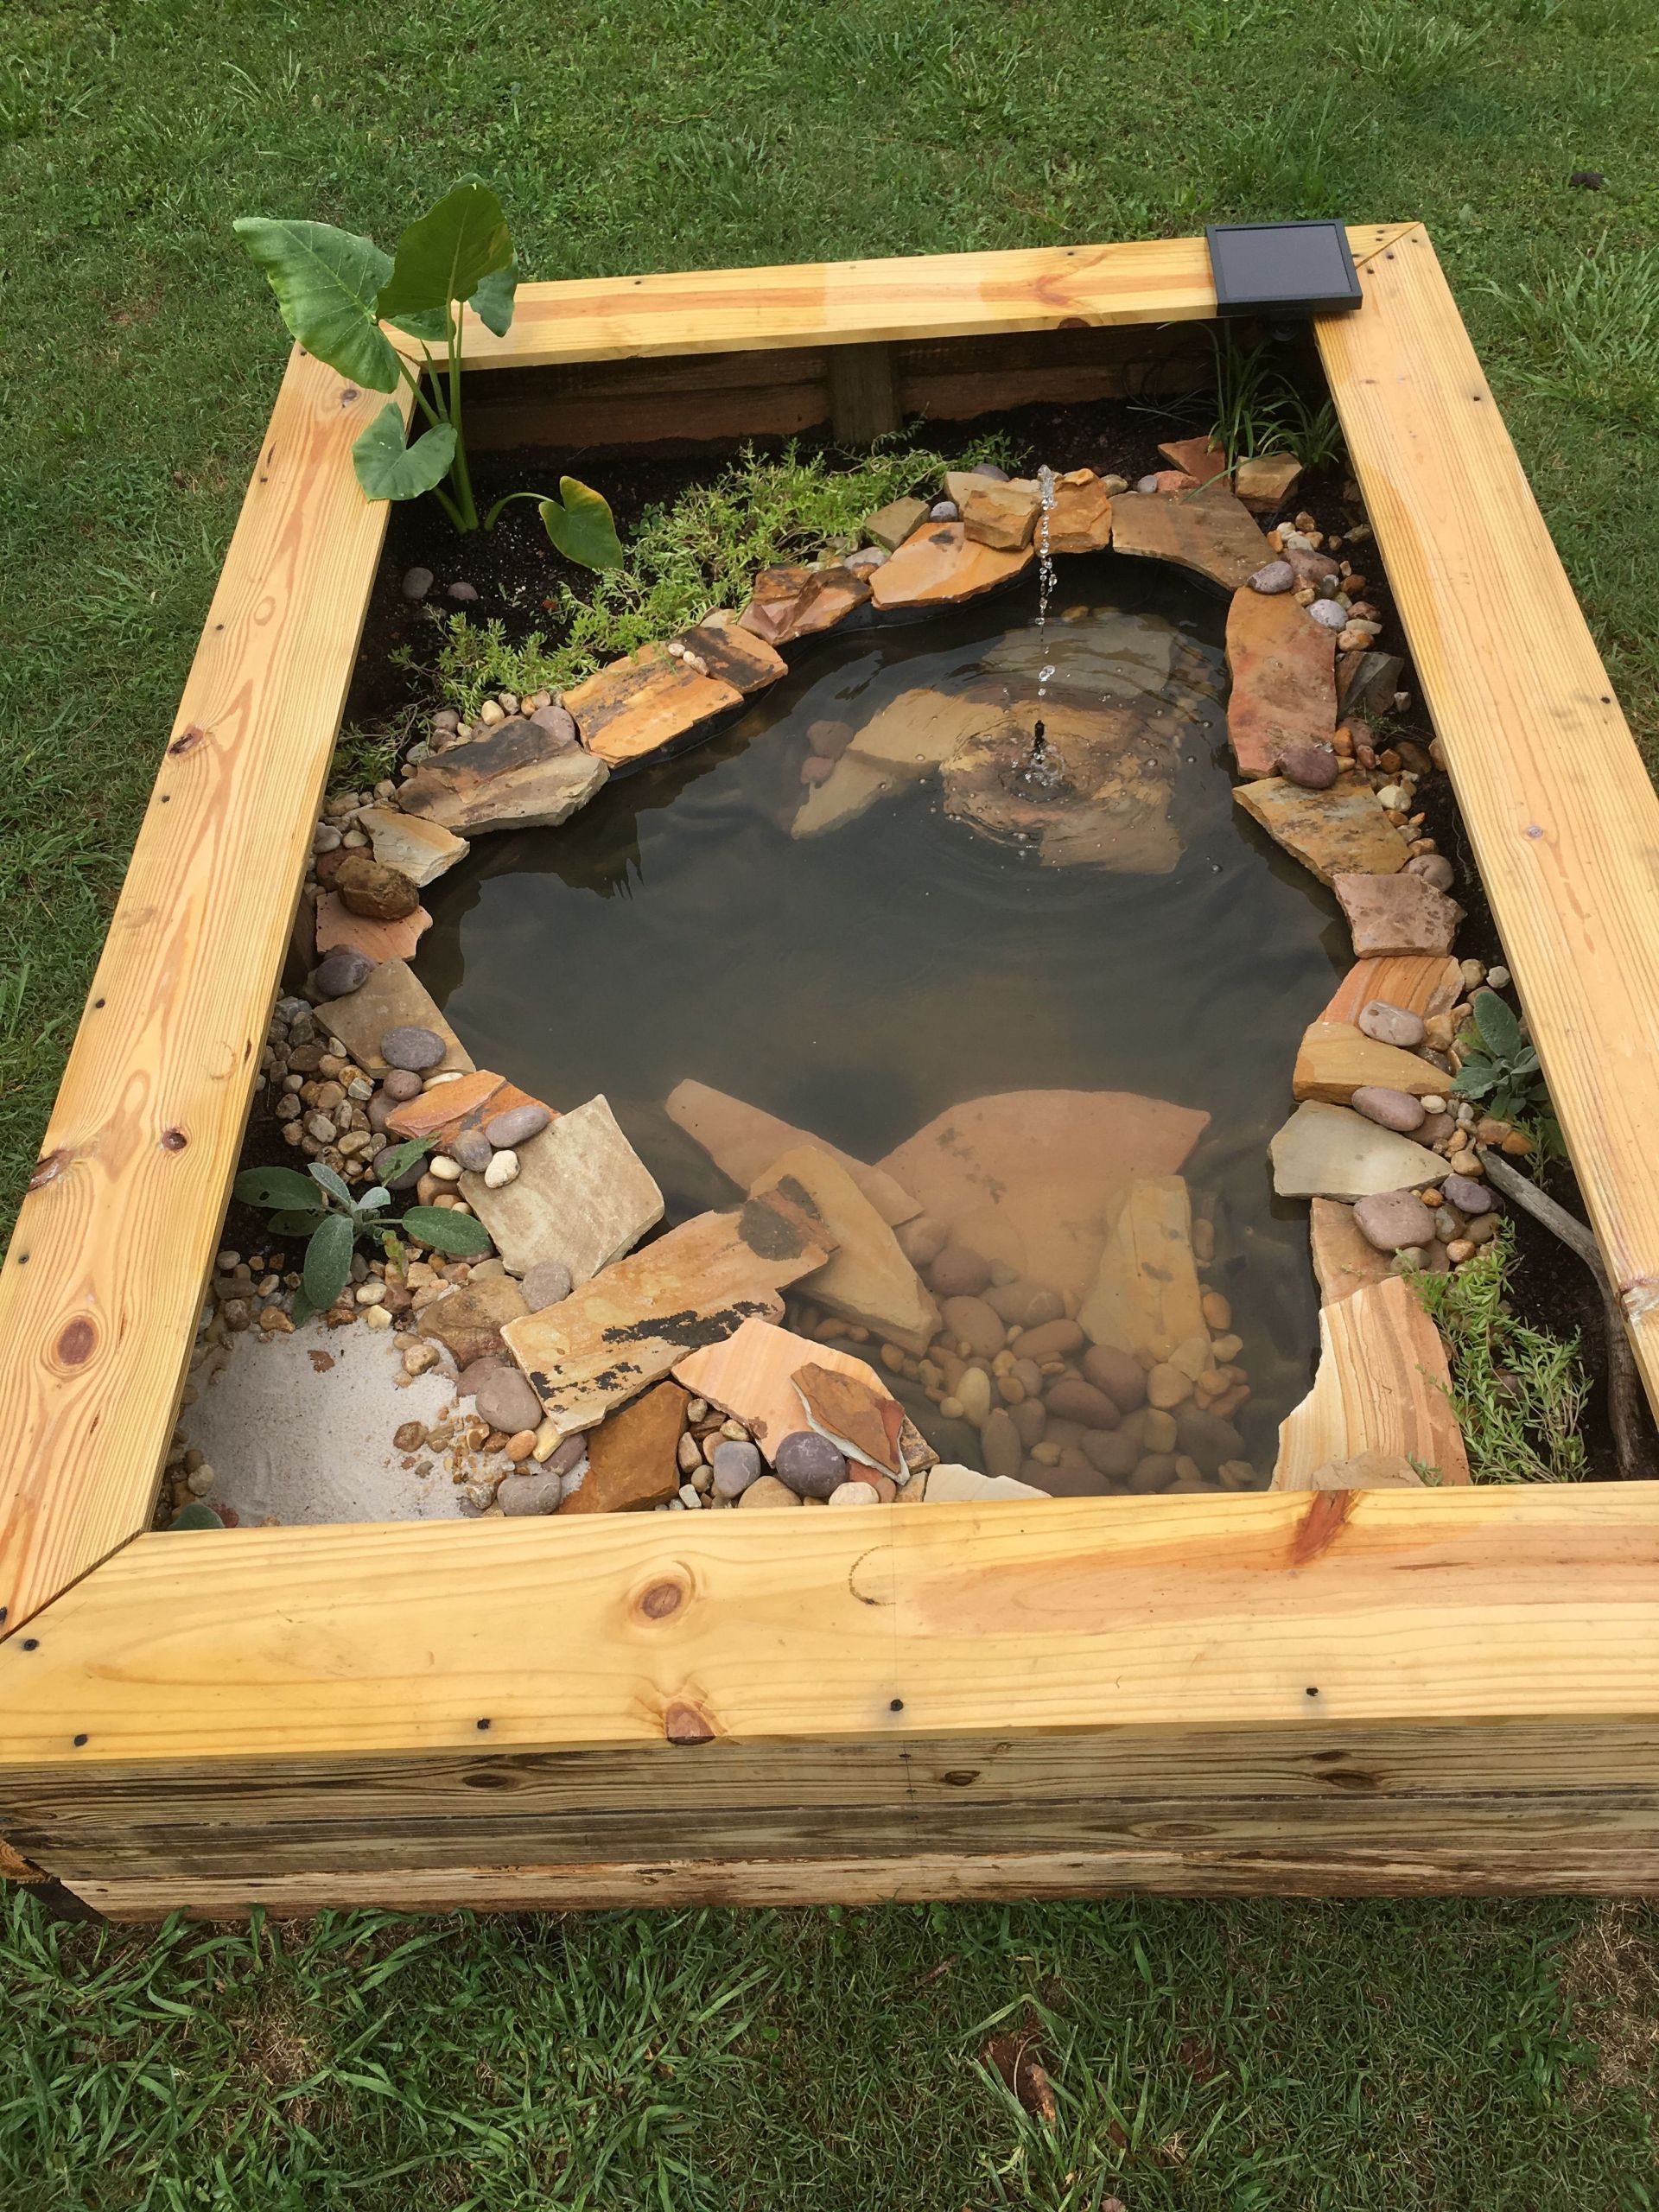 Turtle Backyard Pond
 Our new DIY above ground pond for Bella the turtle